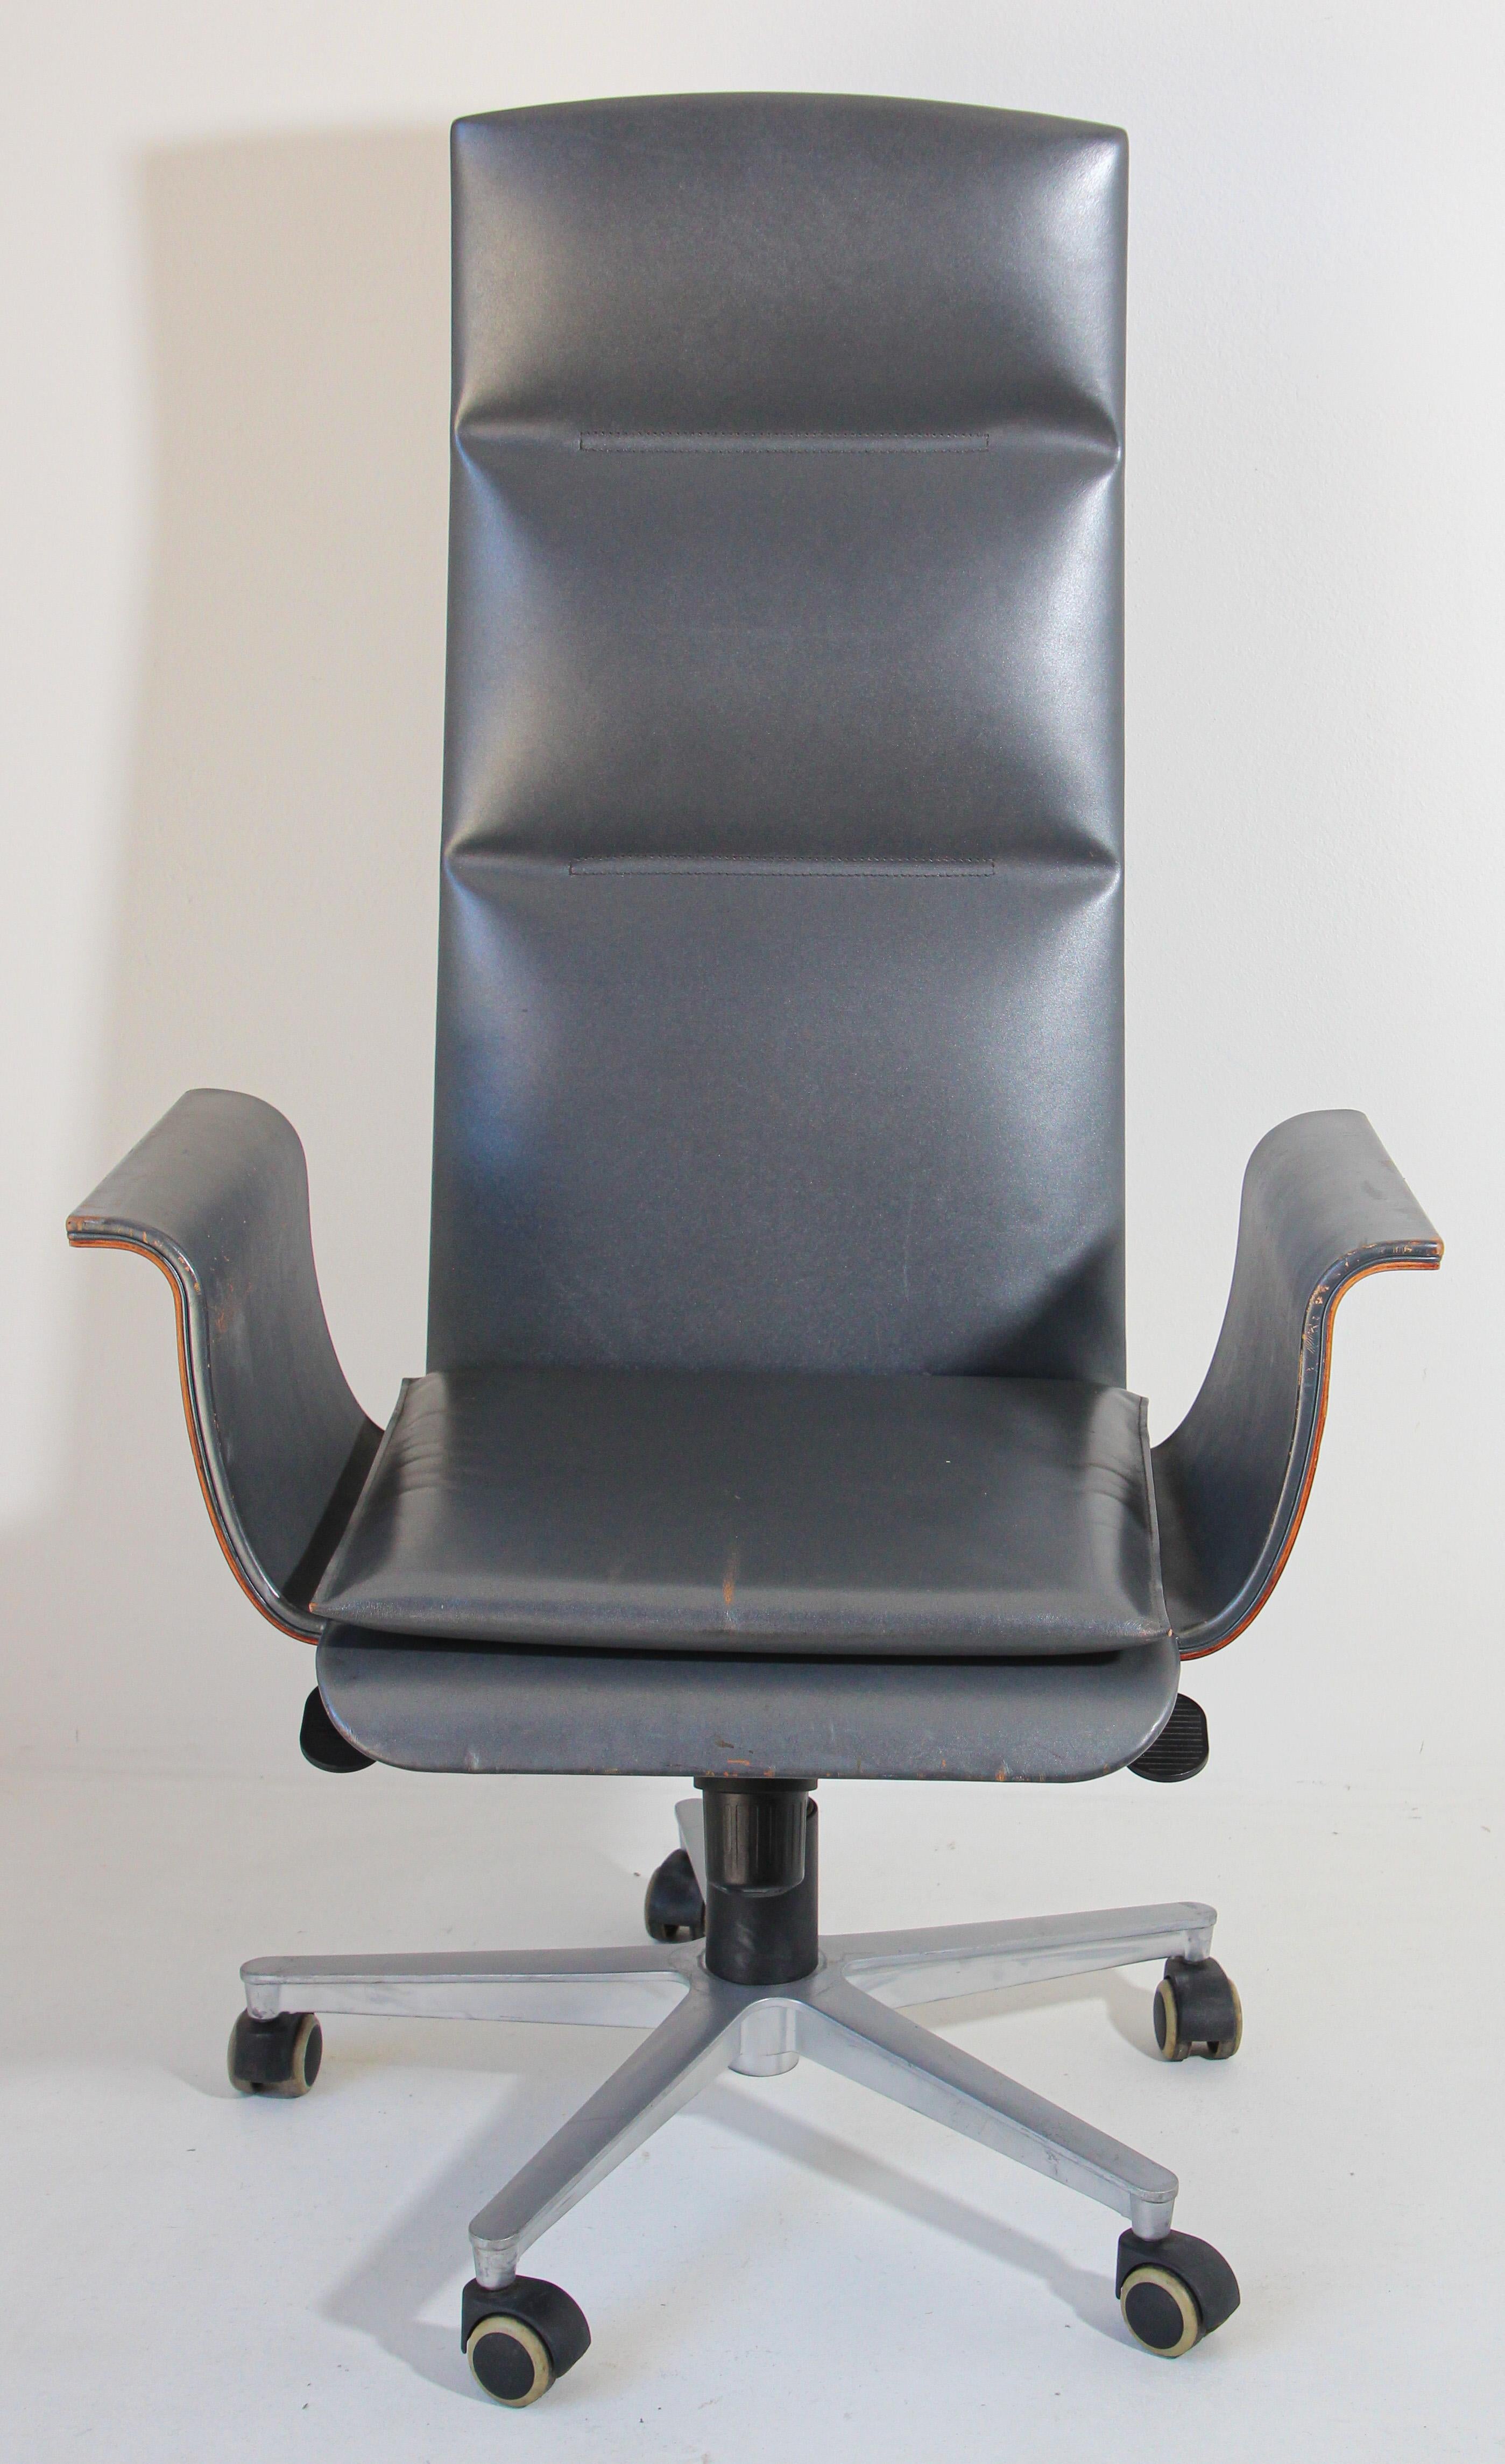 Mariani Wing Executive Office chair, Collection Wing.
i 4 Mariani WING Swivel high-back executive chair with 5-spoke base by Designer Luca Scacchetti.
Executive armchair covered in saddle leather, with swivel, tilt and gas-lift mechanism, base